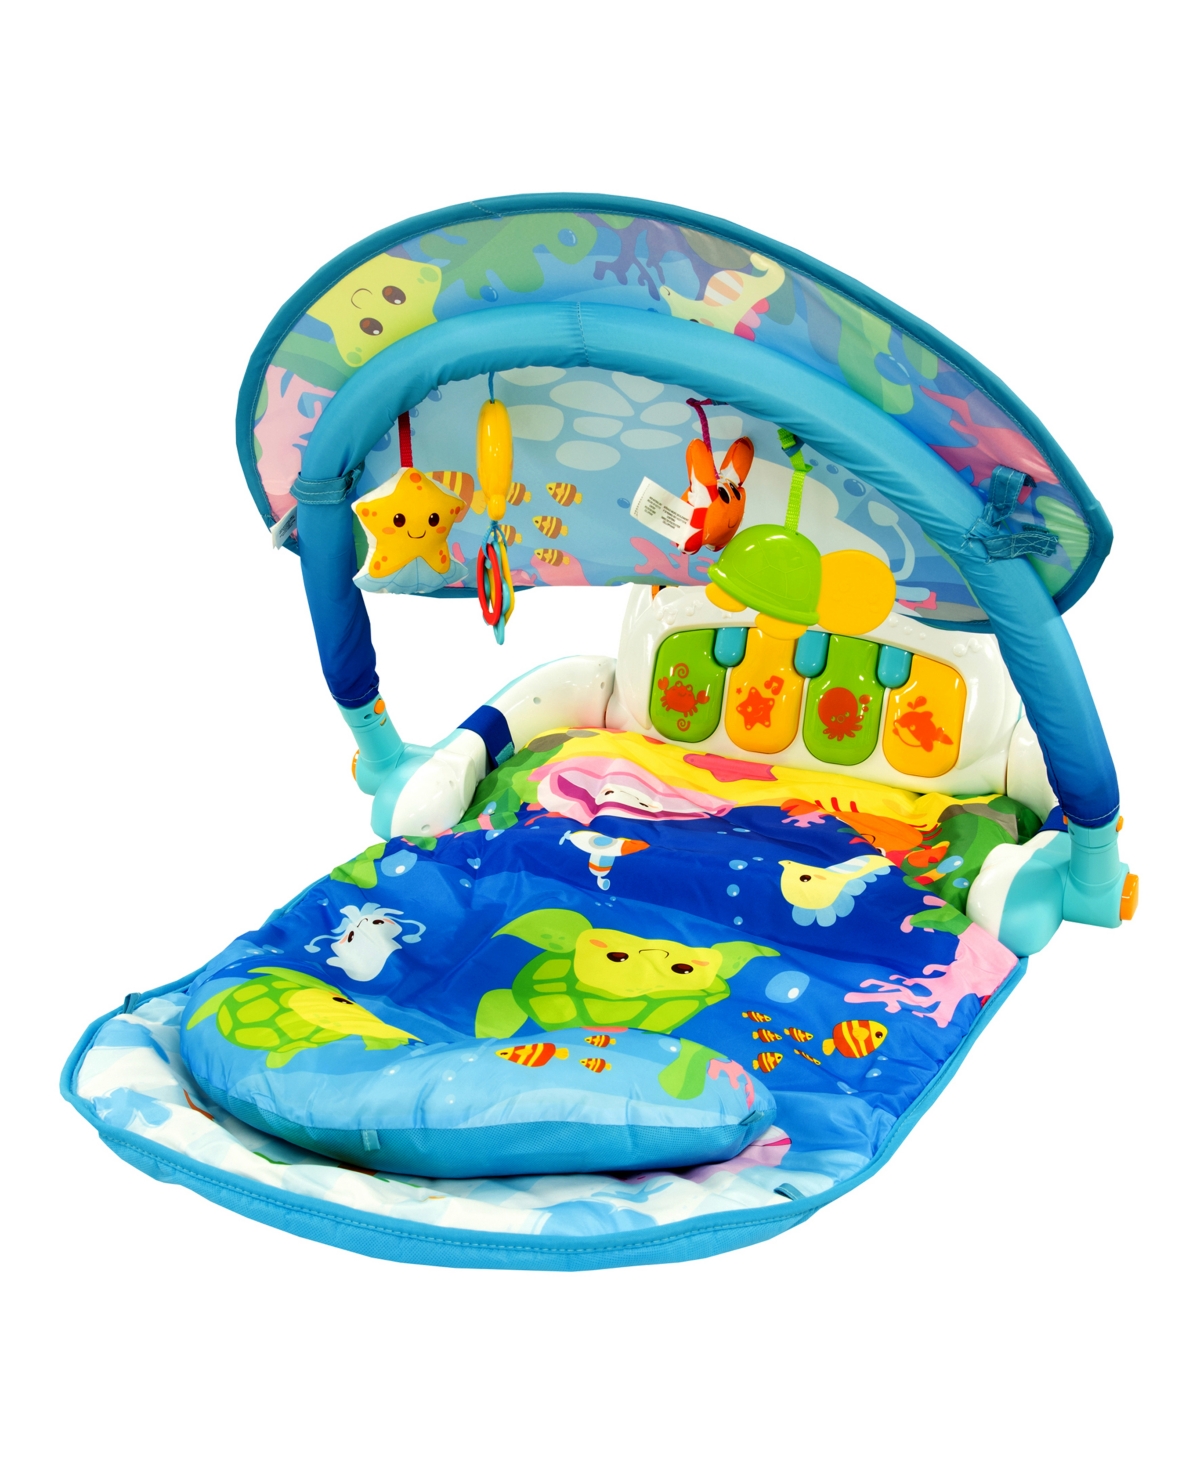 Winfun Magic Lights And Musical Play Gym In Baby Blue